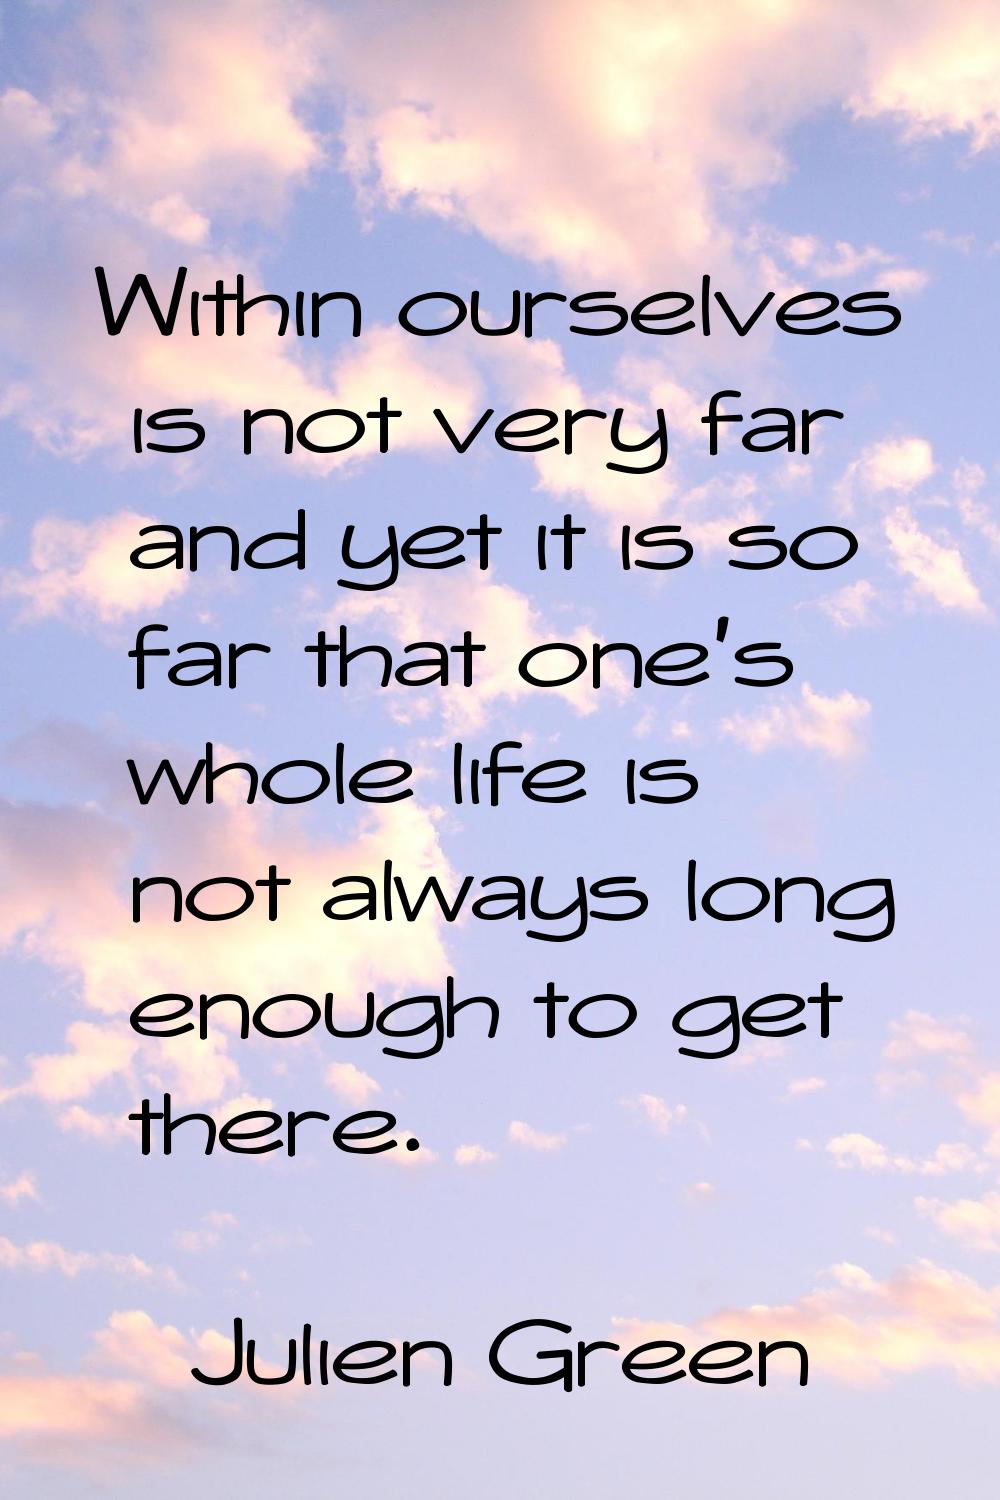 Within ourselves is not very far and yet it is so far that one's whole life is not always long enou